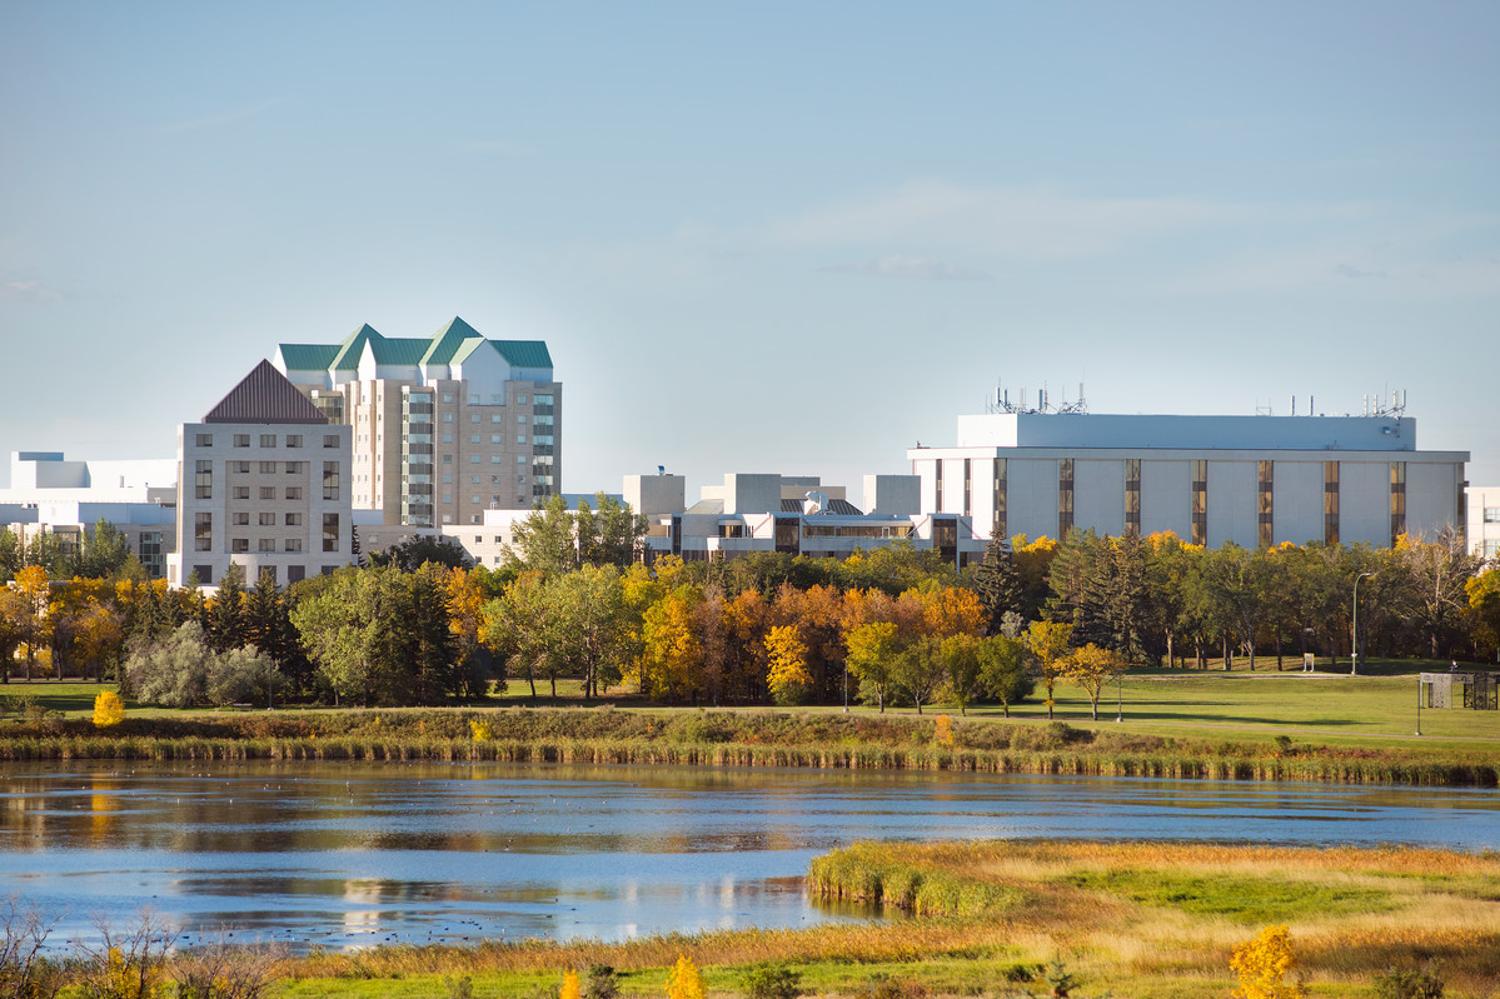 The U of R campus as seen from across Wascana Lake.